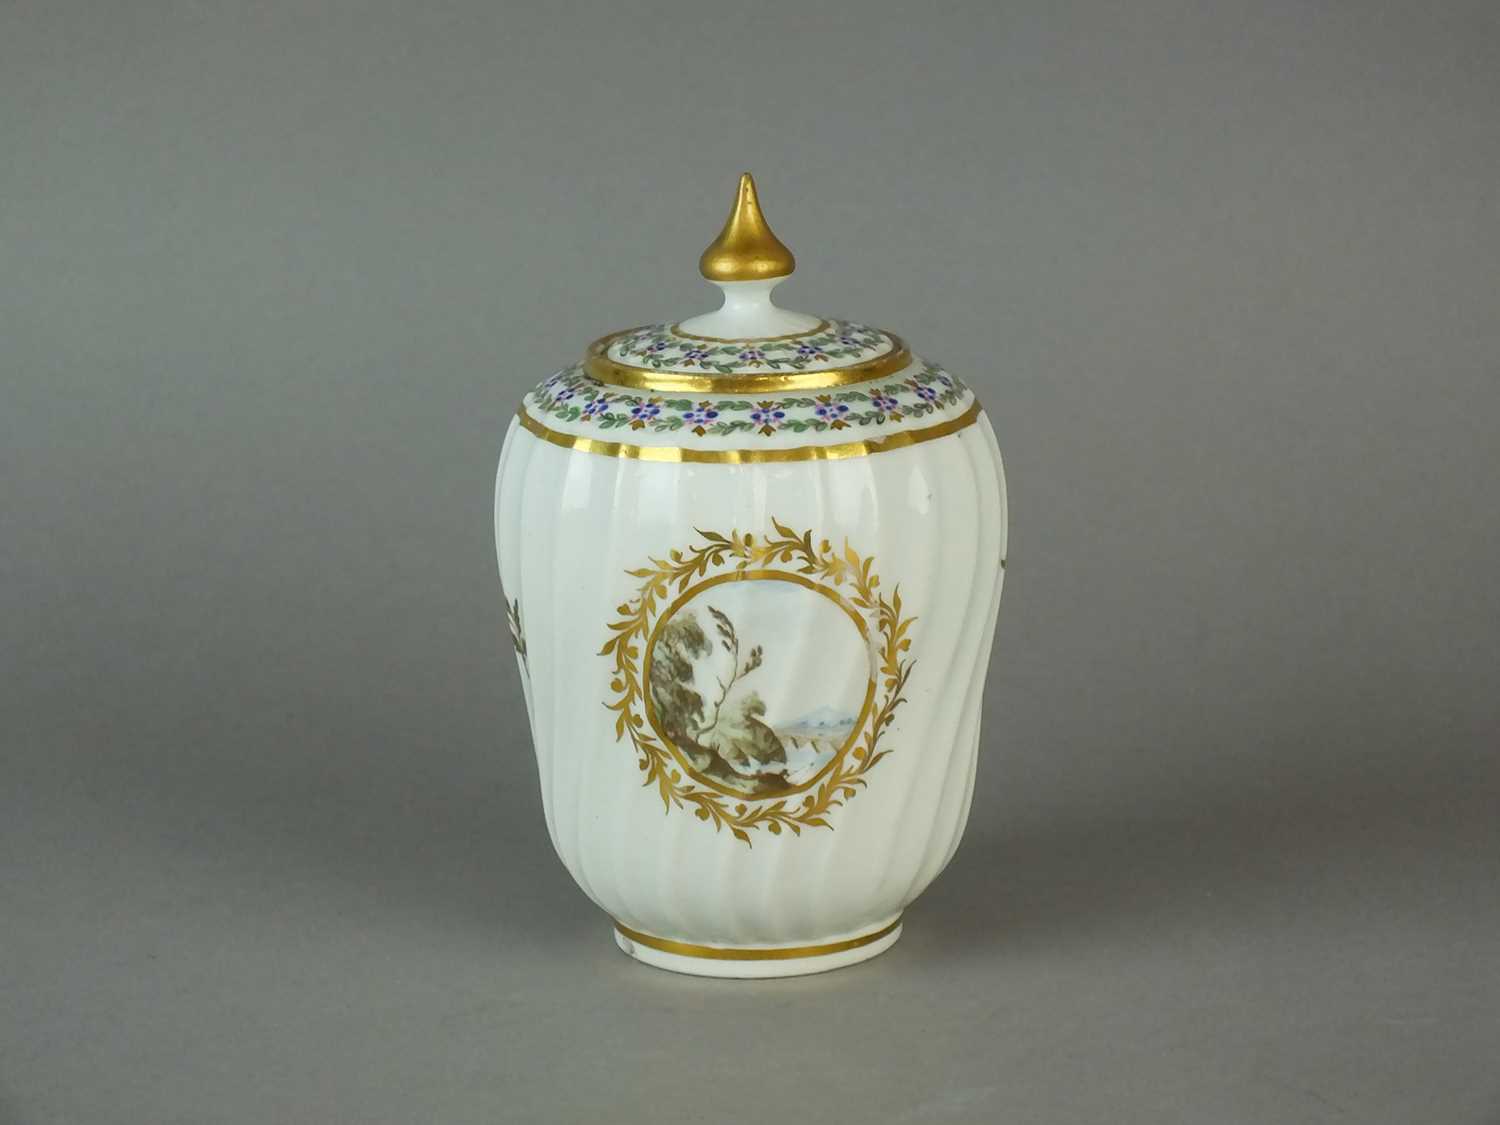 Lot 217 - A Caughley polychrome tea canister and cover, circa 1792-94